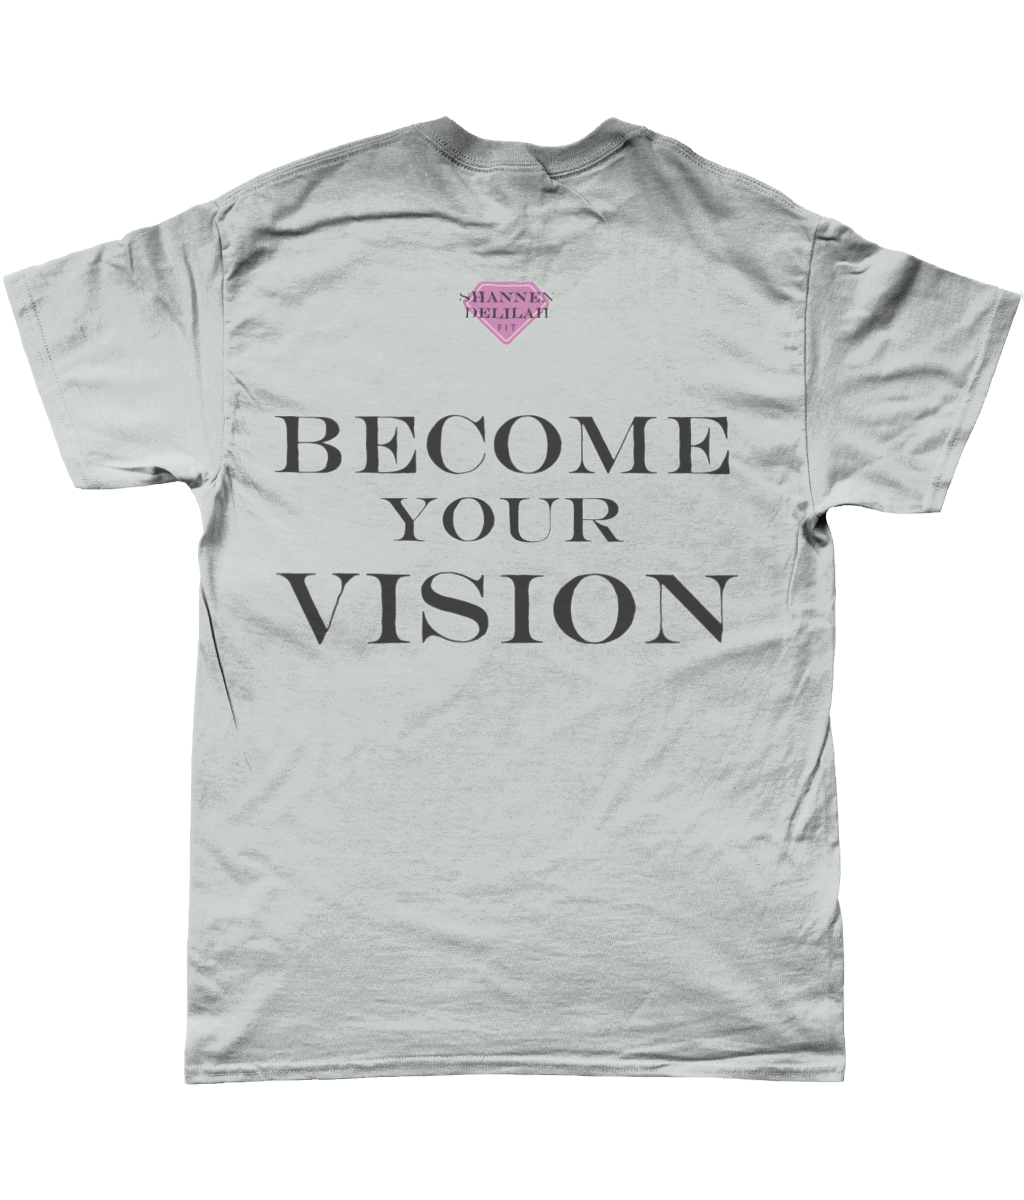 MY VISION IS ME T-SHIRT